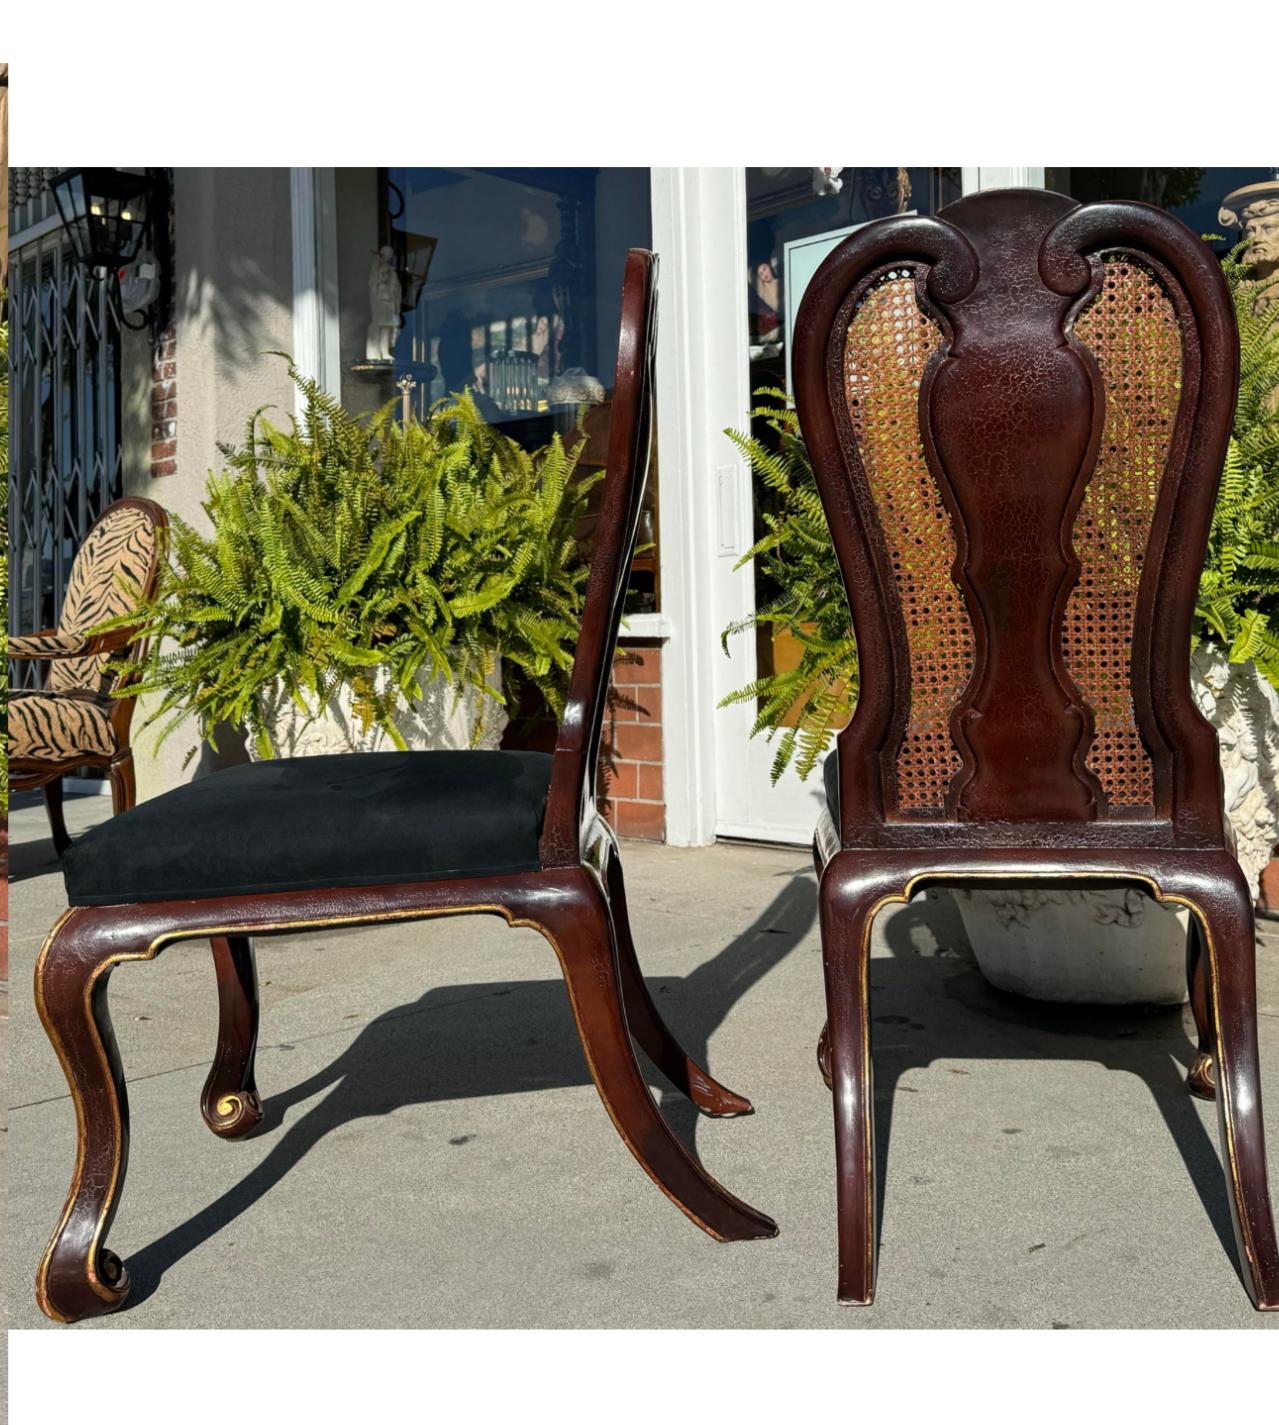 Late 20th Century Rose Tarlow Melrose House Chinoiserie Chairs - a Pair For Sale